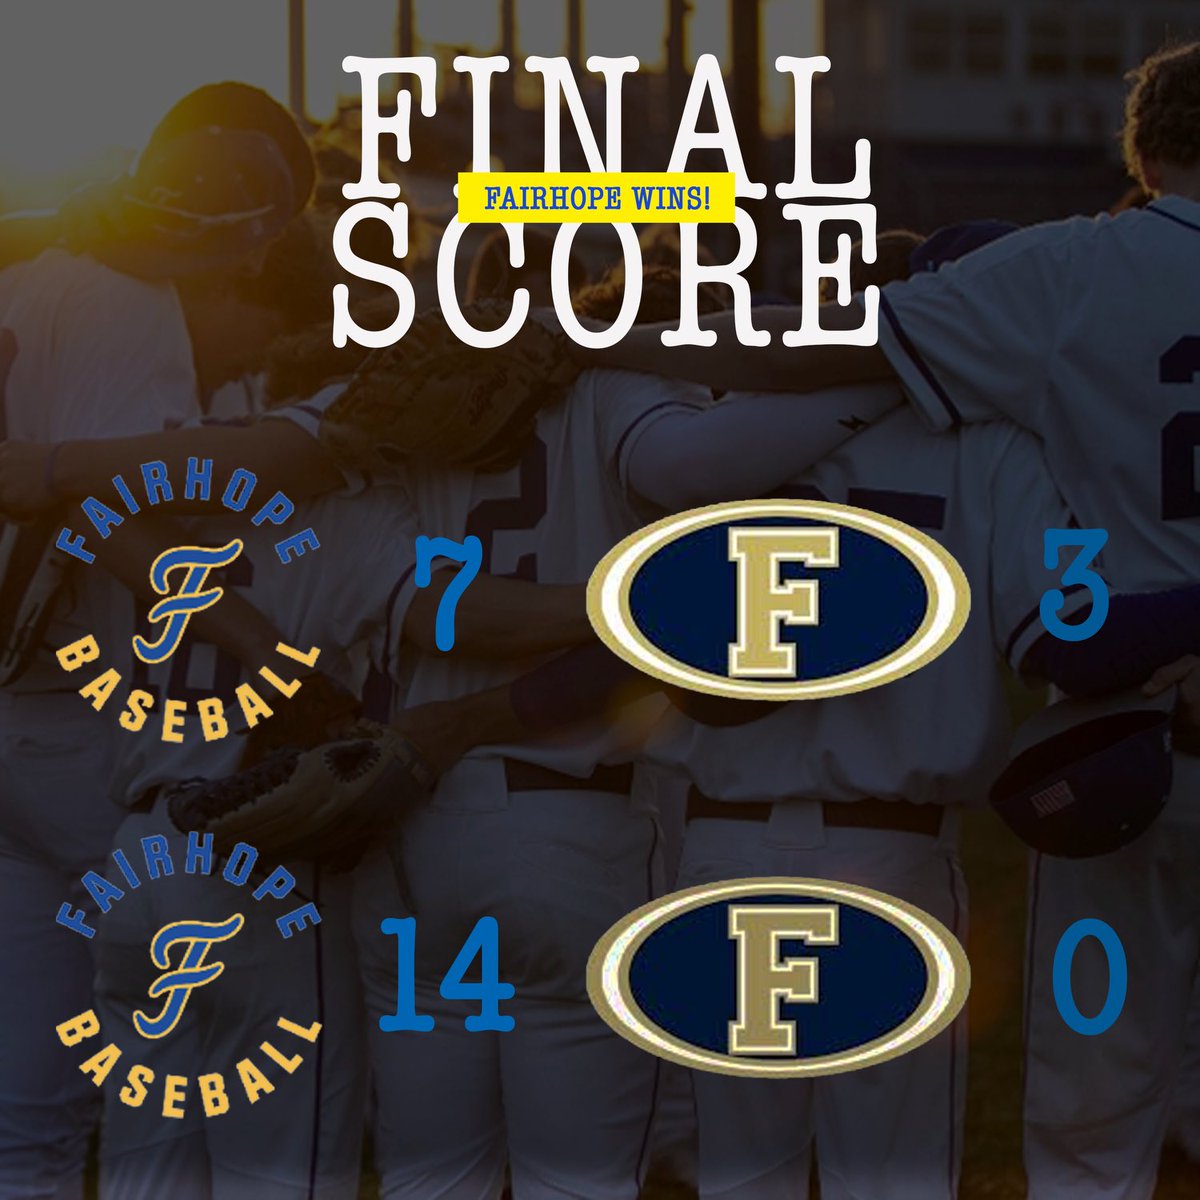 Fairhope sweeps the series from Foley and wins the area championship! Game 1 (W, 7-3) Bryon Martin: 2/4, 2R, RBI Rock Gearhart: 3/3, R Blake Westry: 1/2, 2RBI Harrison Cook (W): 3.1IP, 4H, ER, 4K Next Game: Senior Day tomorrow at 5:00 PM at Volanta. #GoPirates 🏴‍☠️